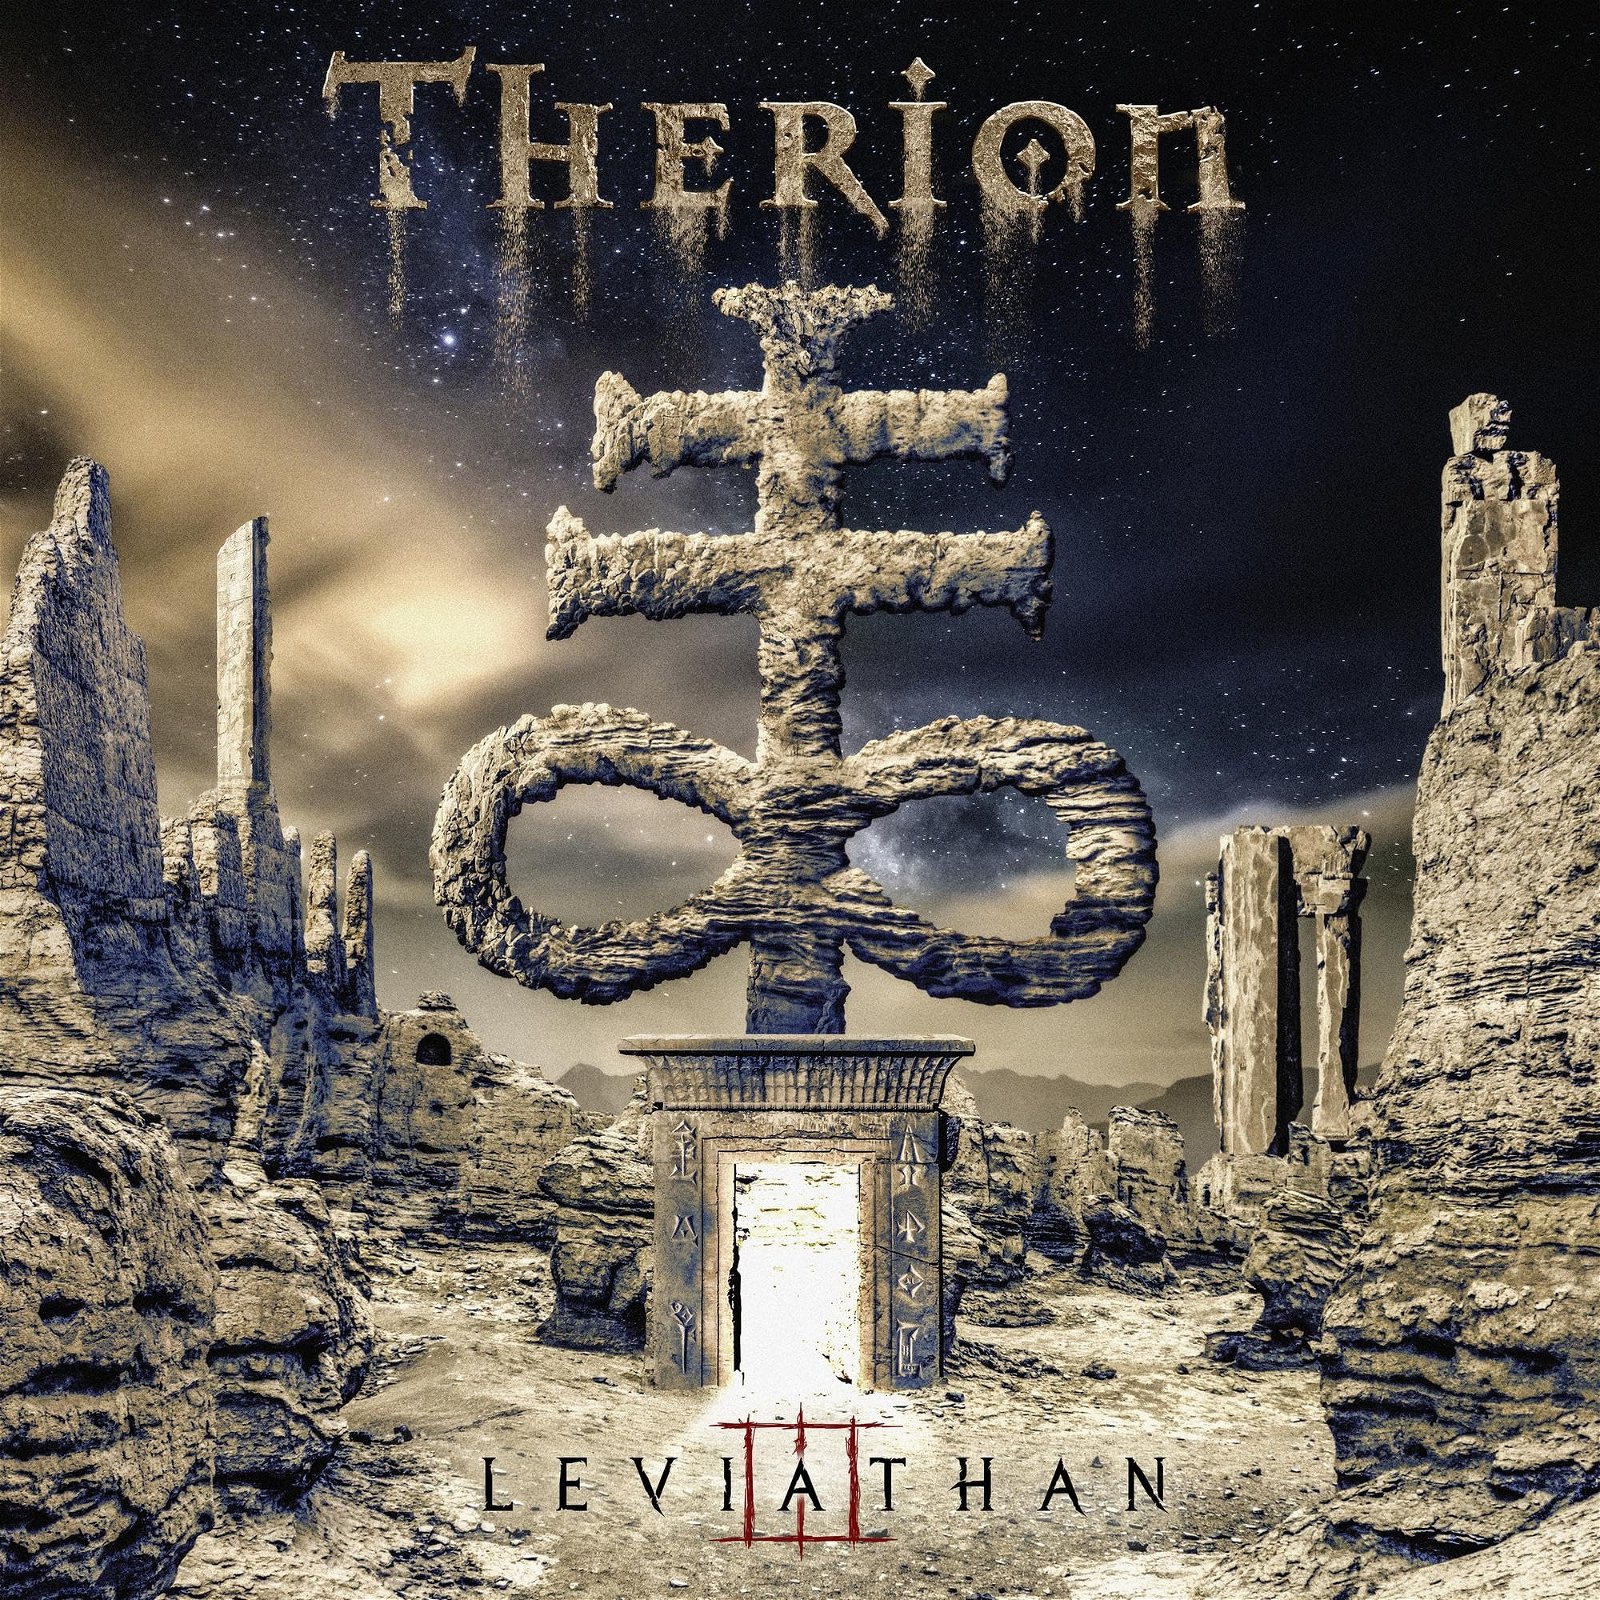 CD Shop - THERION LEVIATHAN III